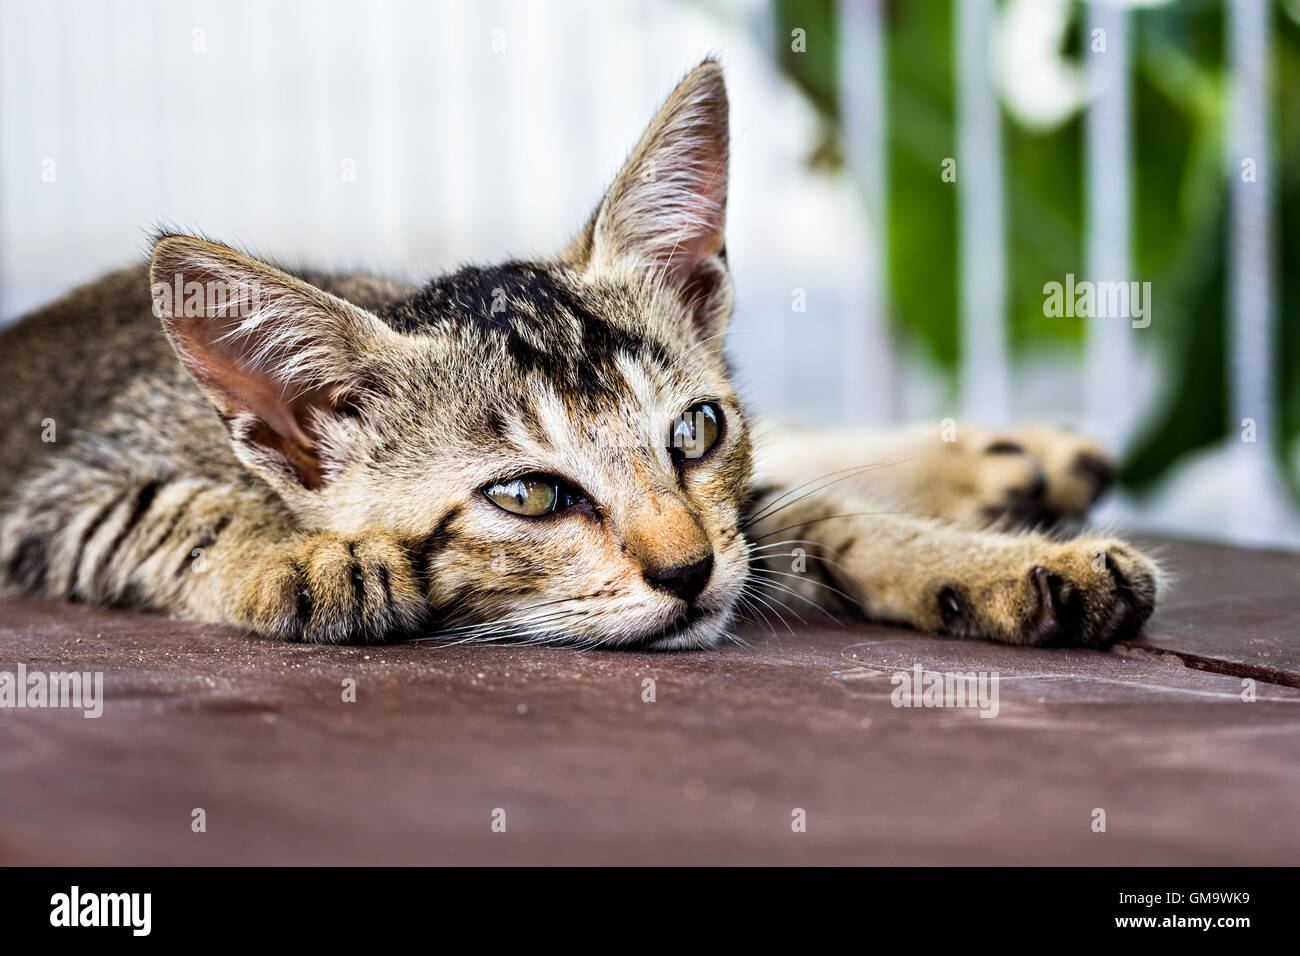 a kitten looking so tired and stressed resting on a table Stock Photo